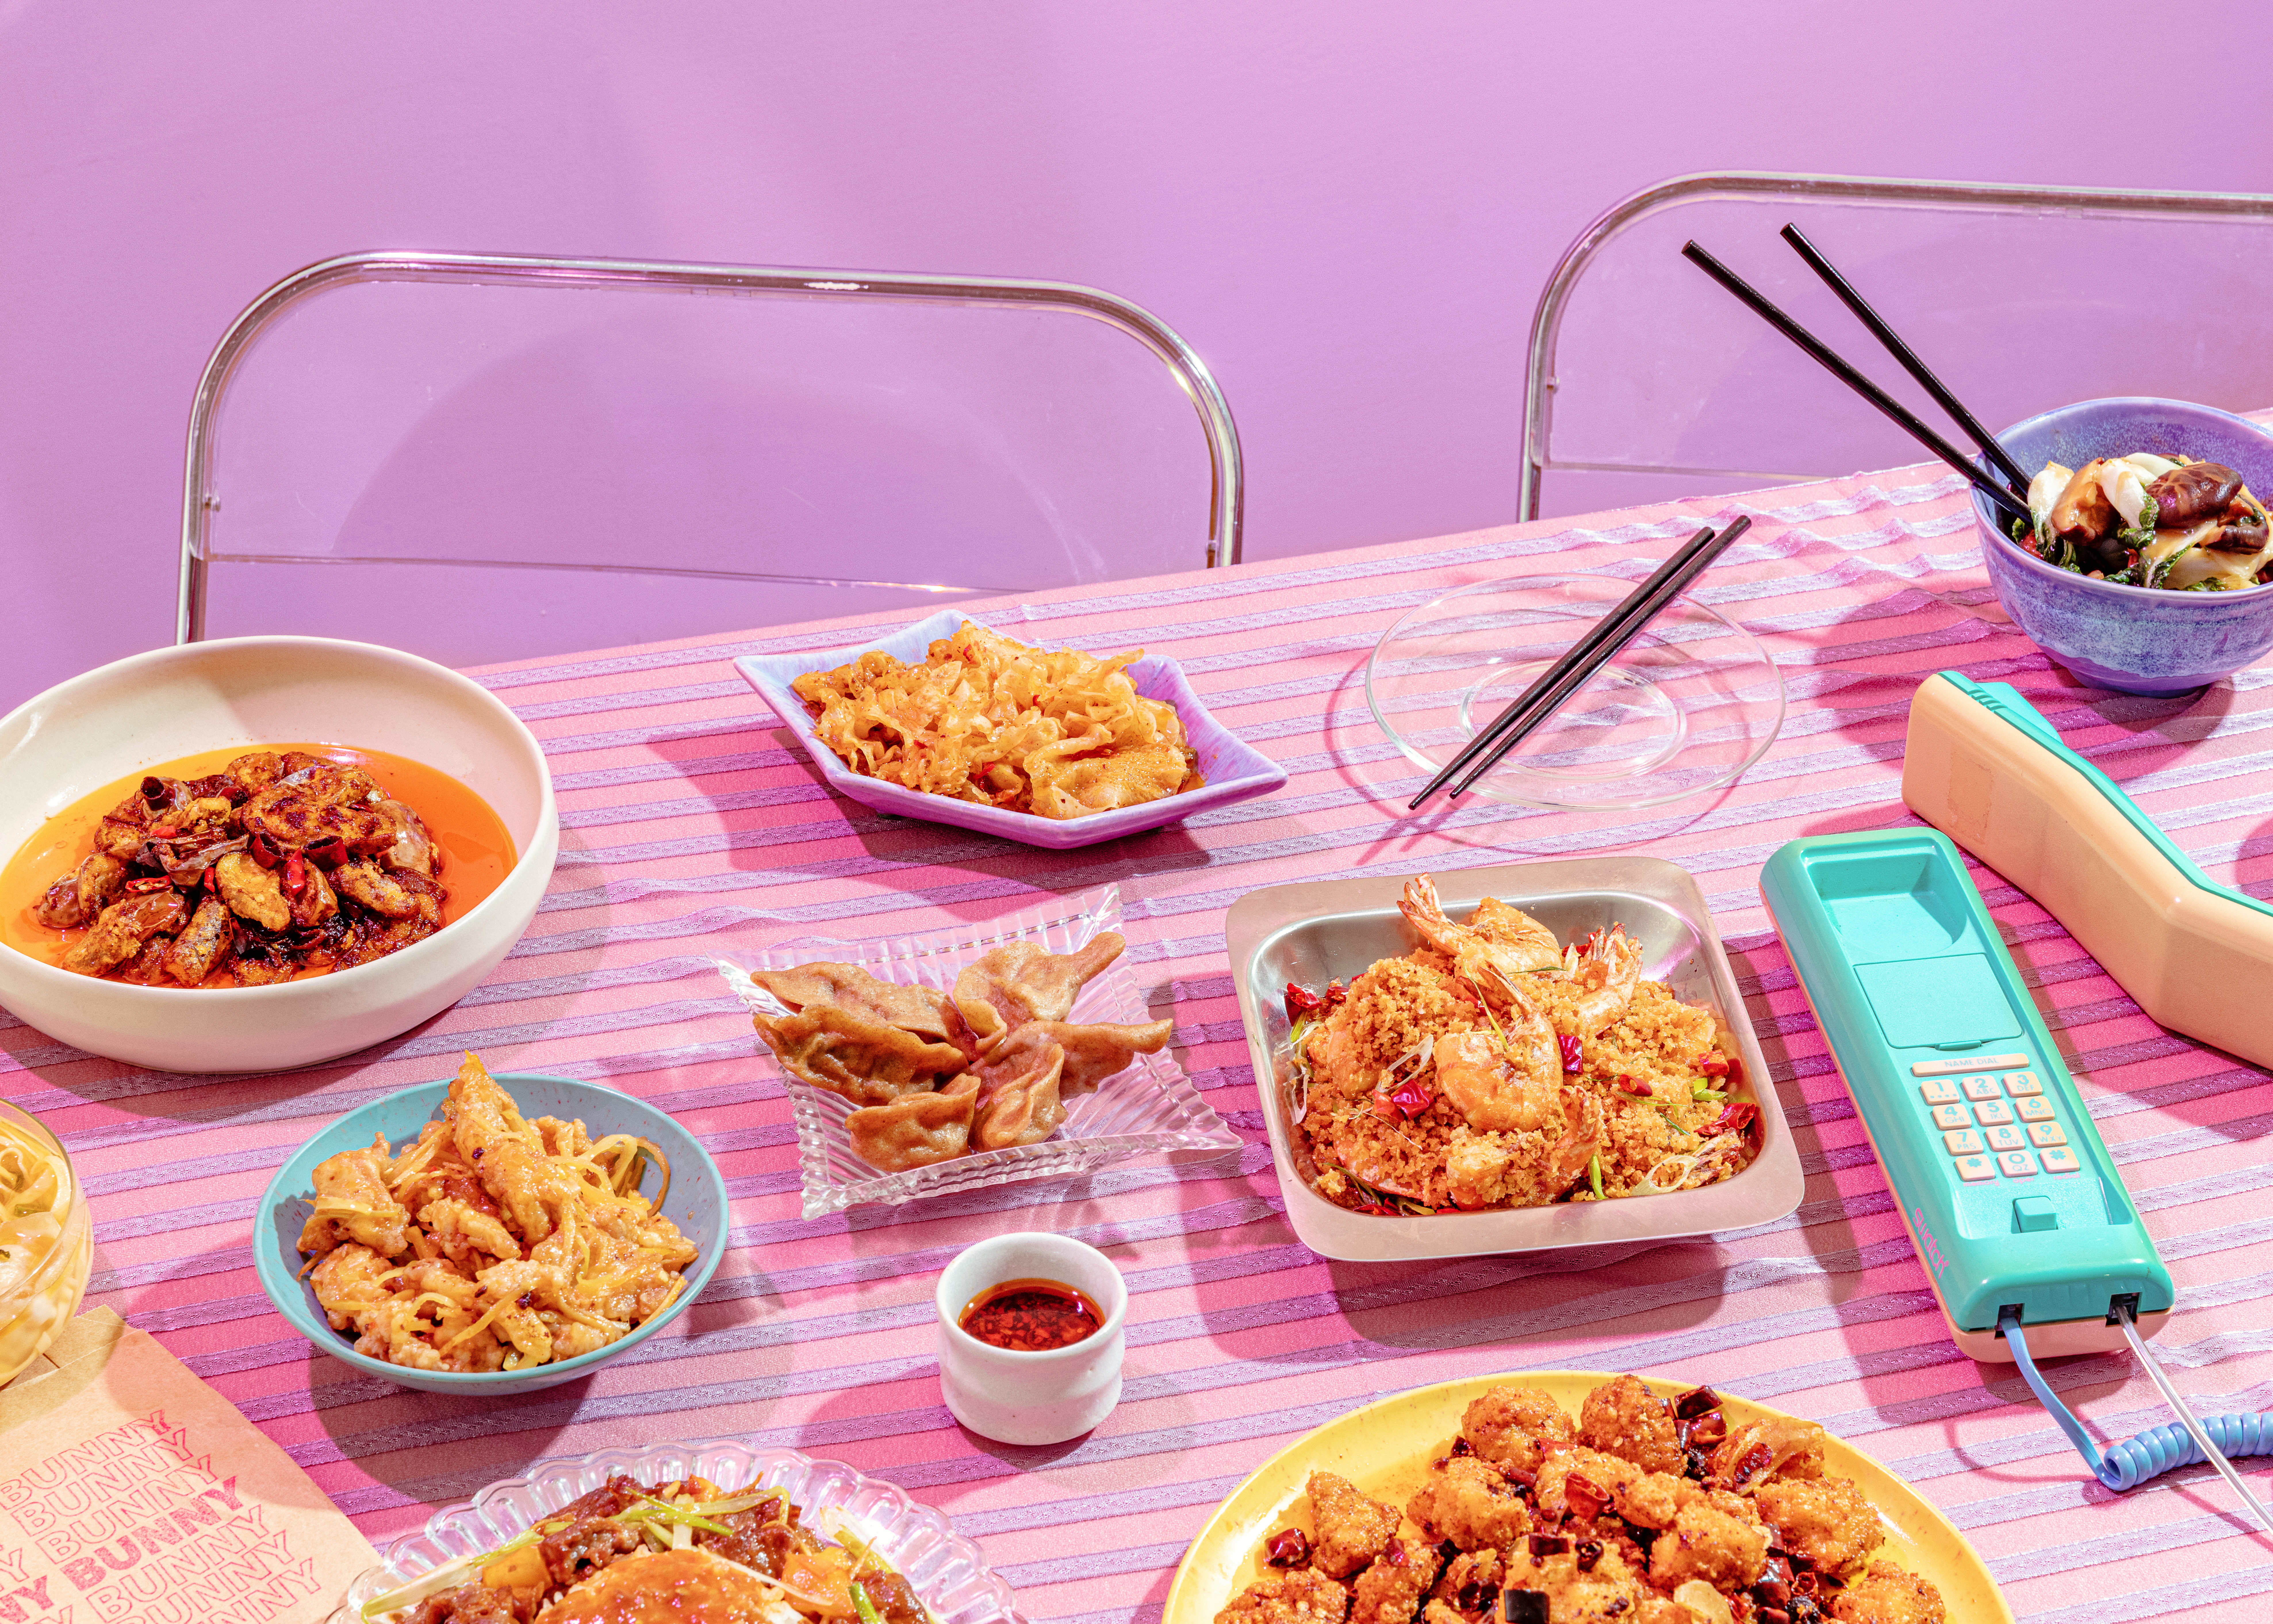 Dishes on a retro, 1980s-styled table with dishes from Bunny Bunny surrounded by silver and clear plastic chairs and a pastel-colored corded phone.